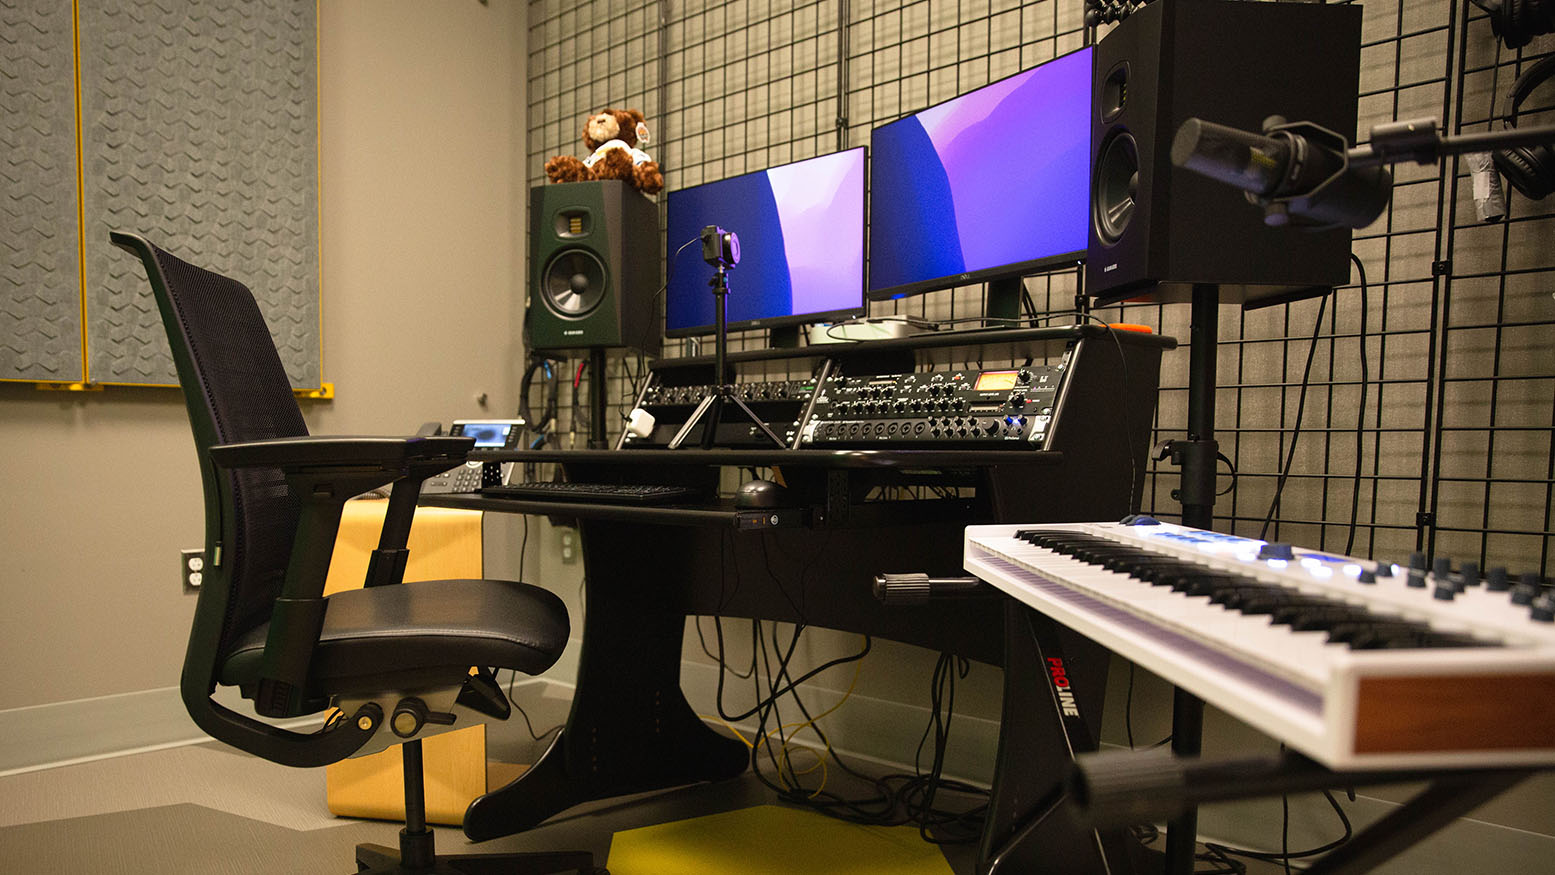 Monitors, keyboard and sound system to create music